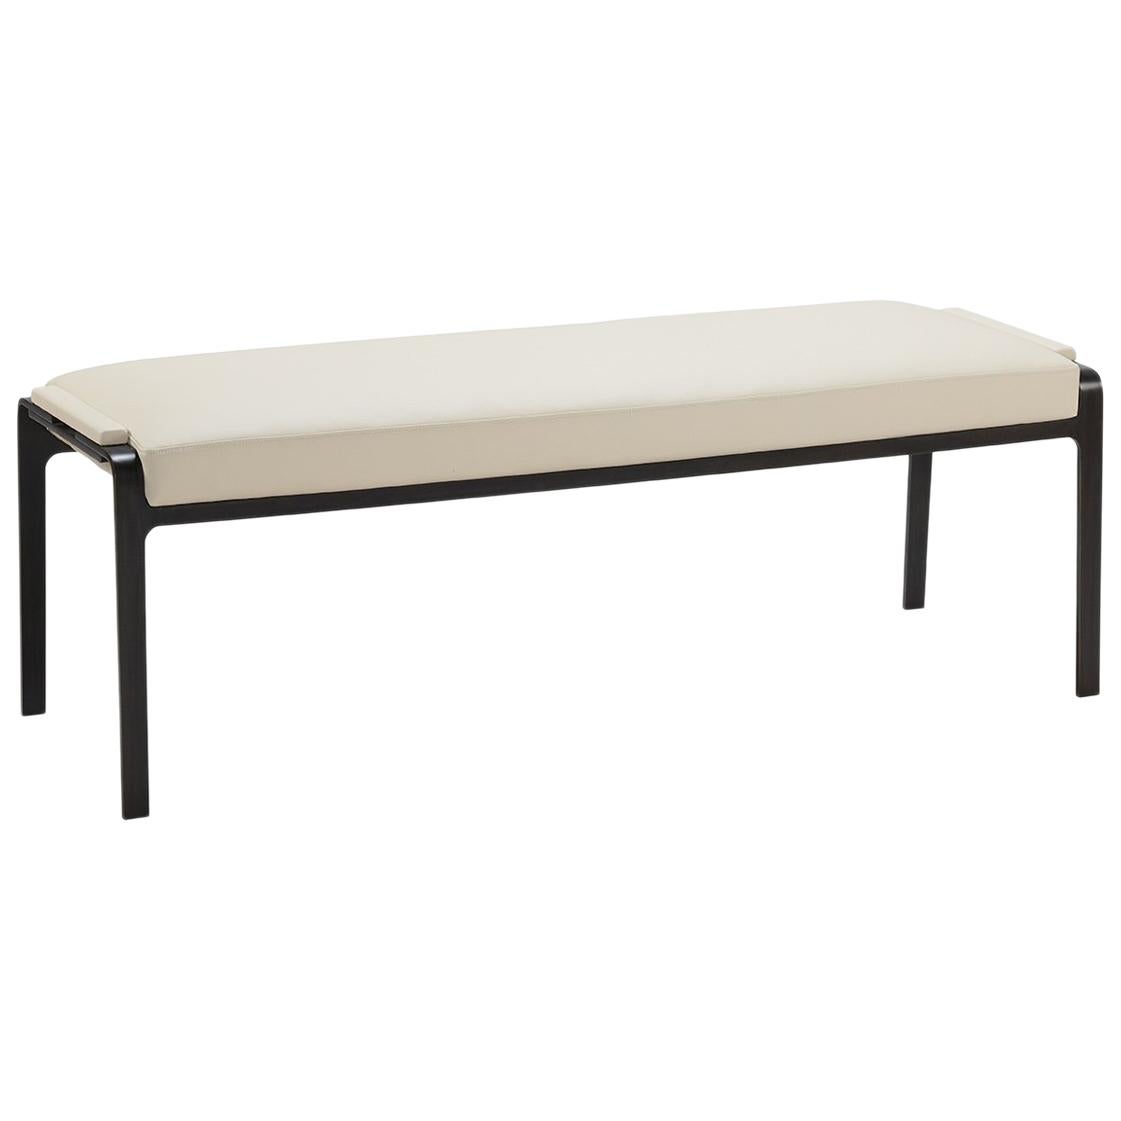 Gazelle Bench in AP Tipper Leather with Black Metal Steel legs For Sale